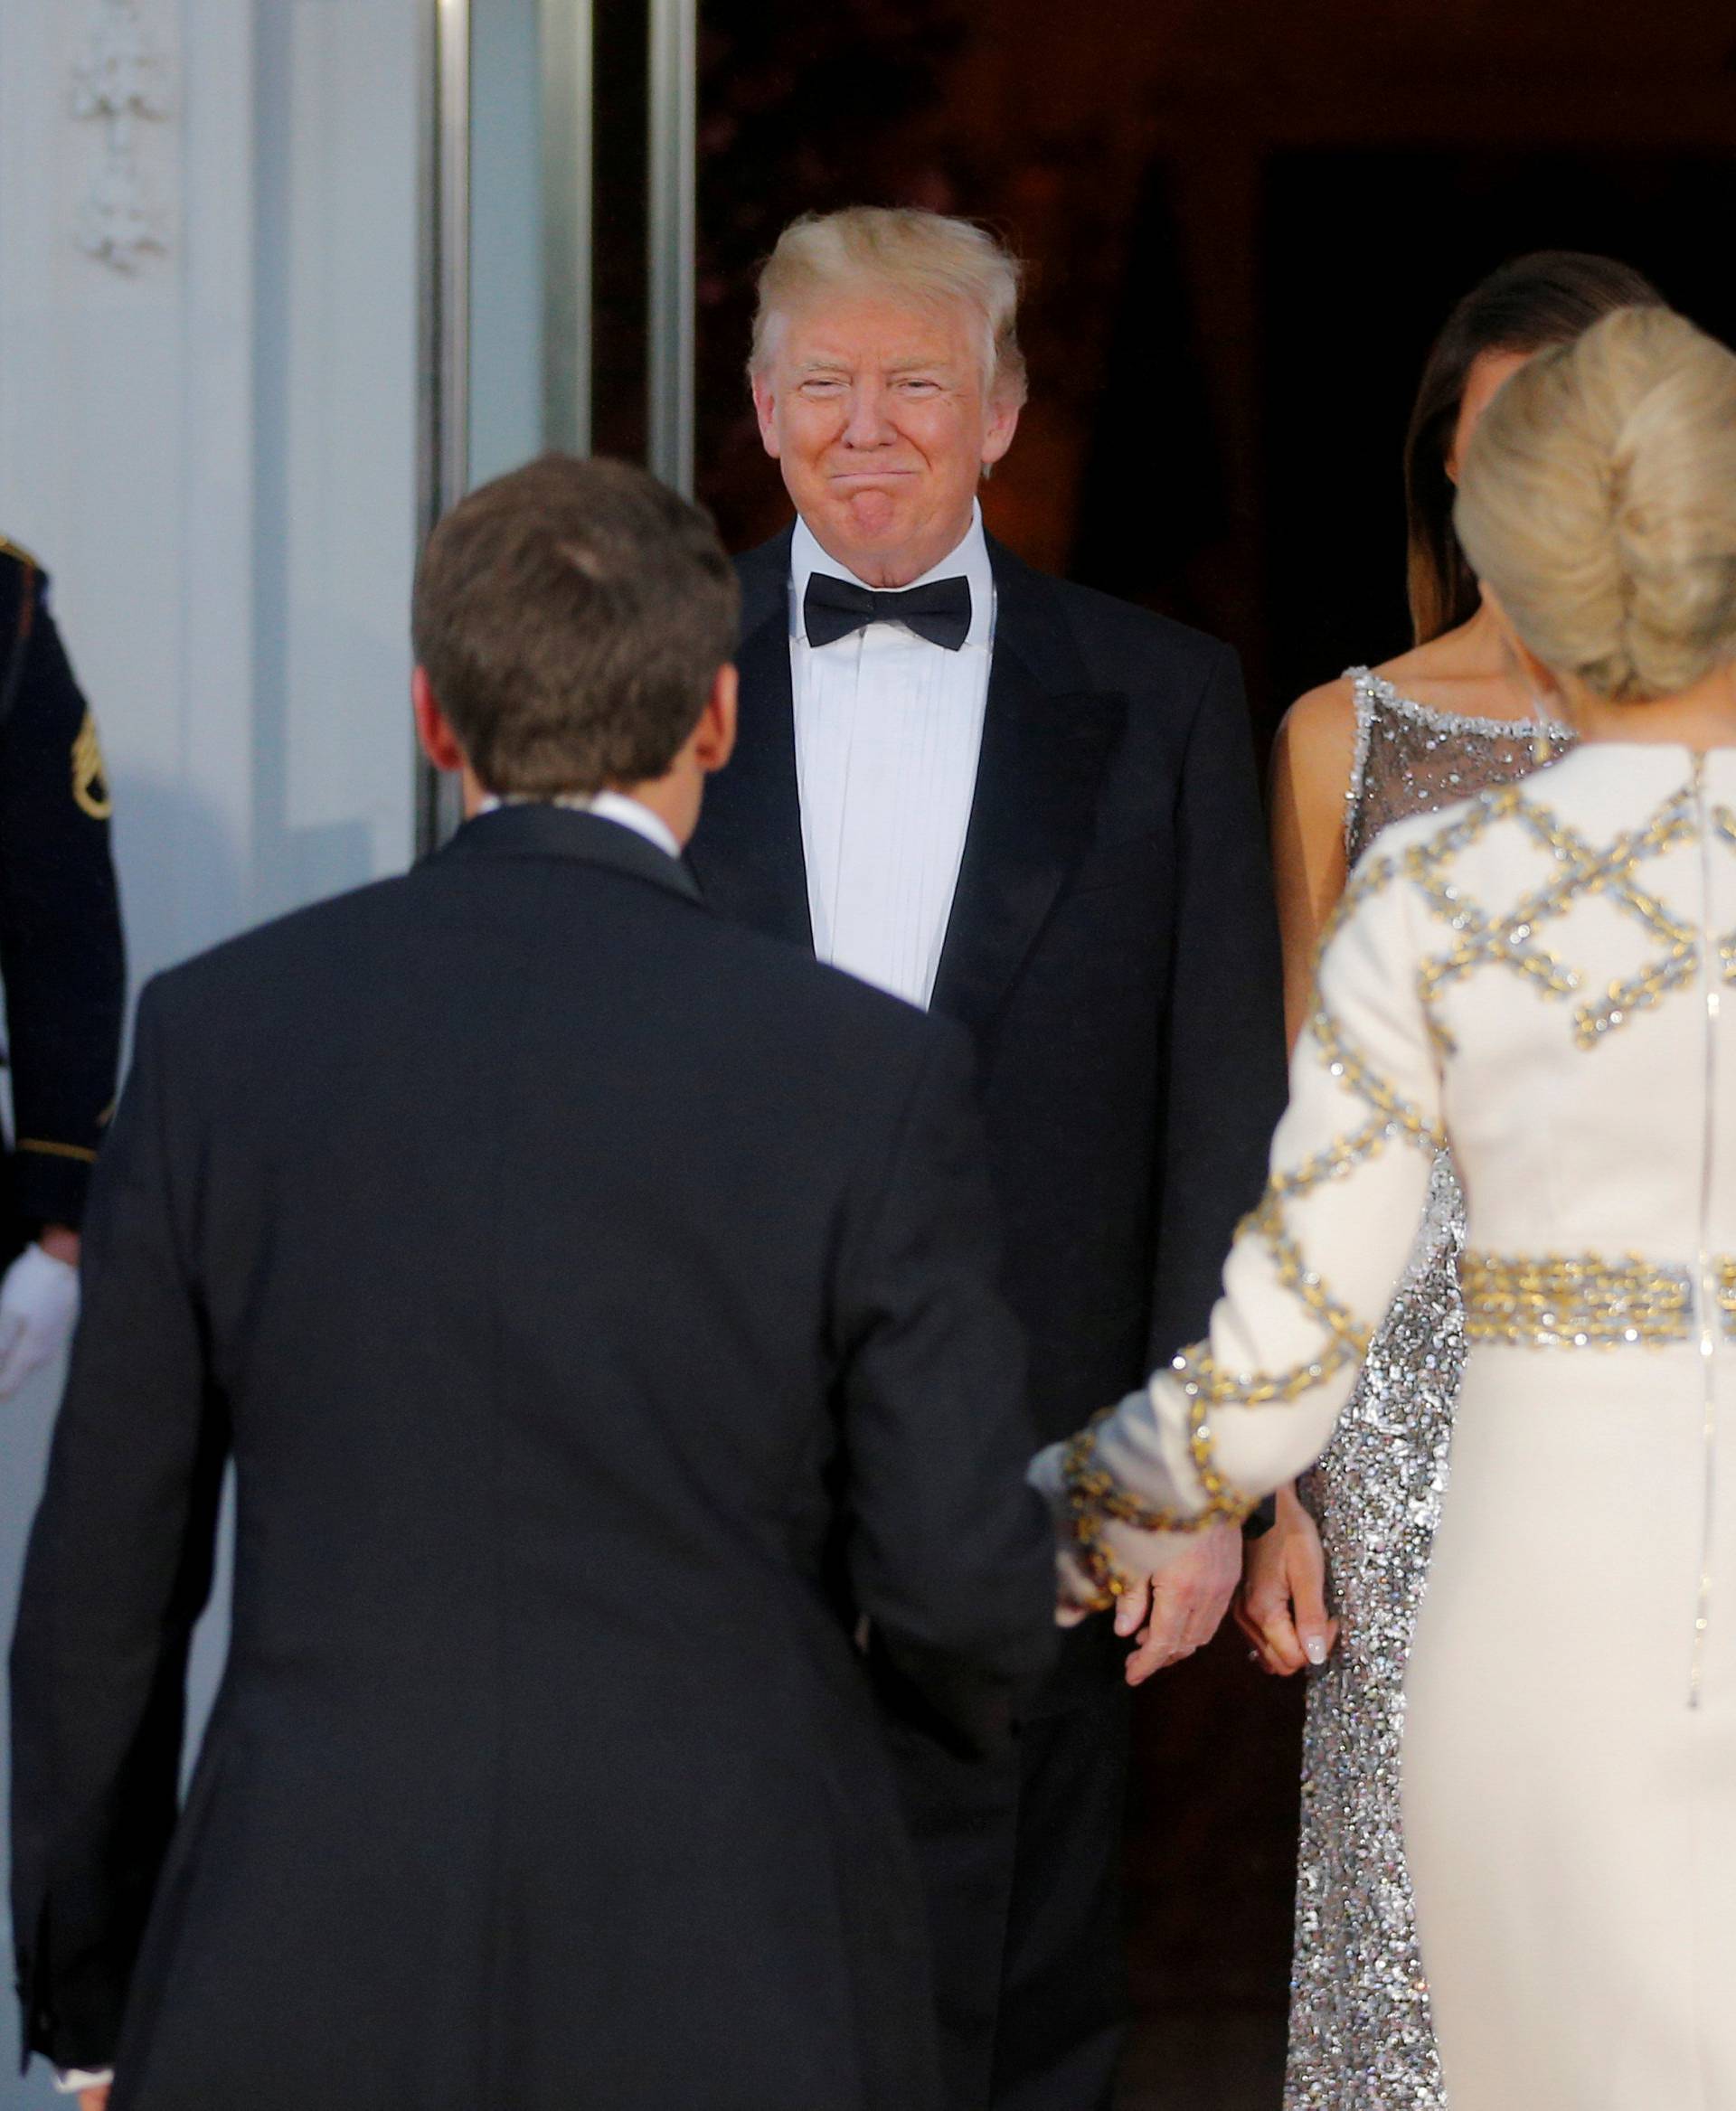 U.S. President Trump and first lady Melania welcome French President Macron and his wife for a State Dinner at the White House in Washington